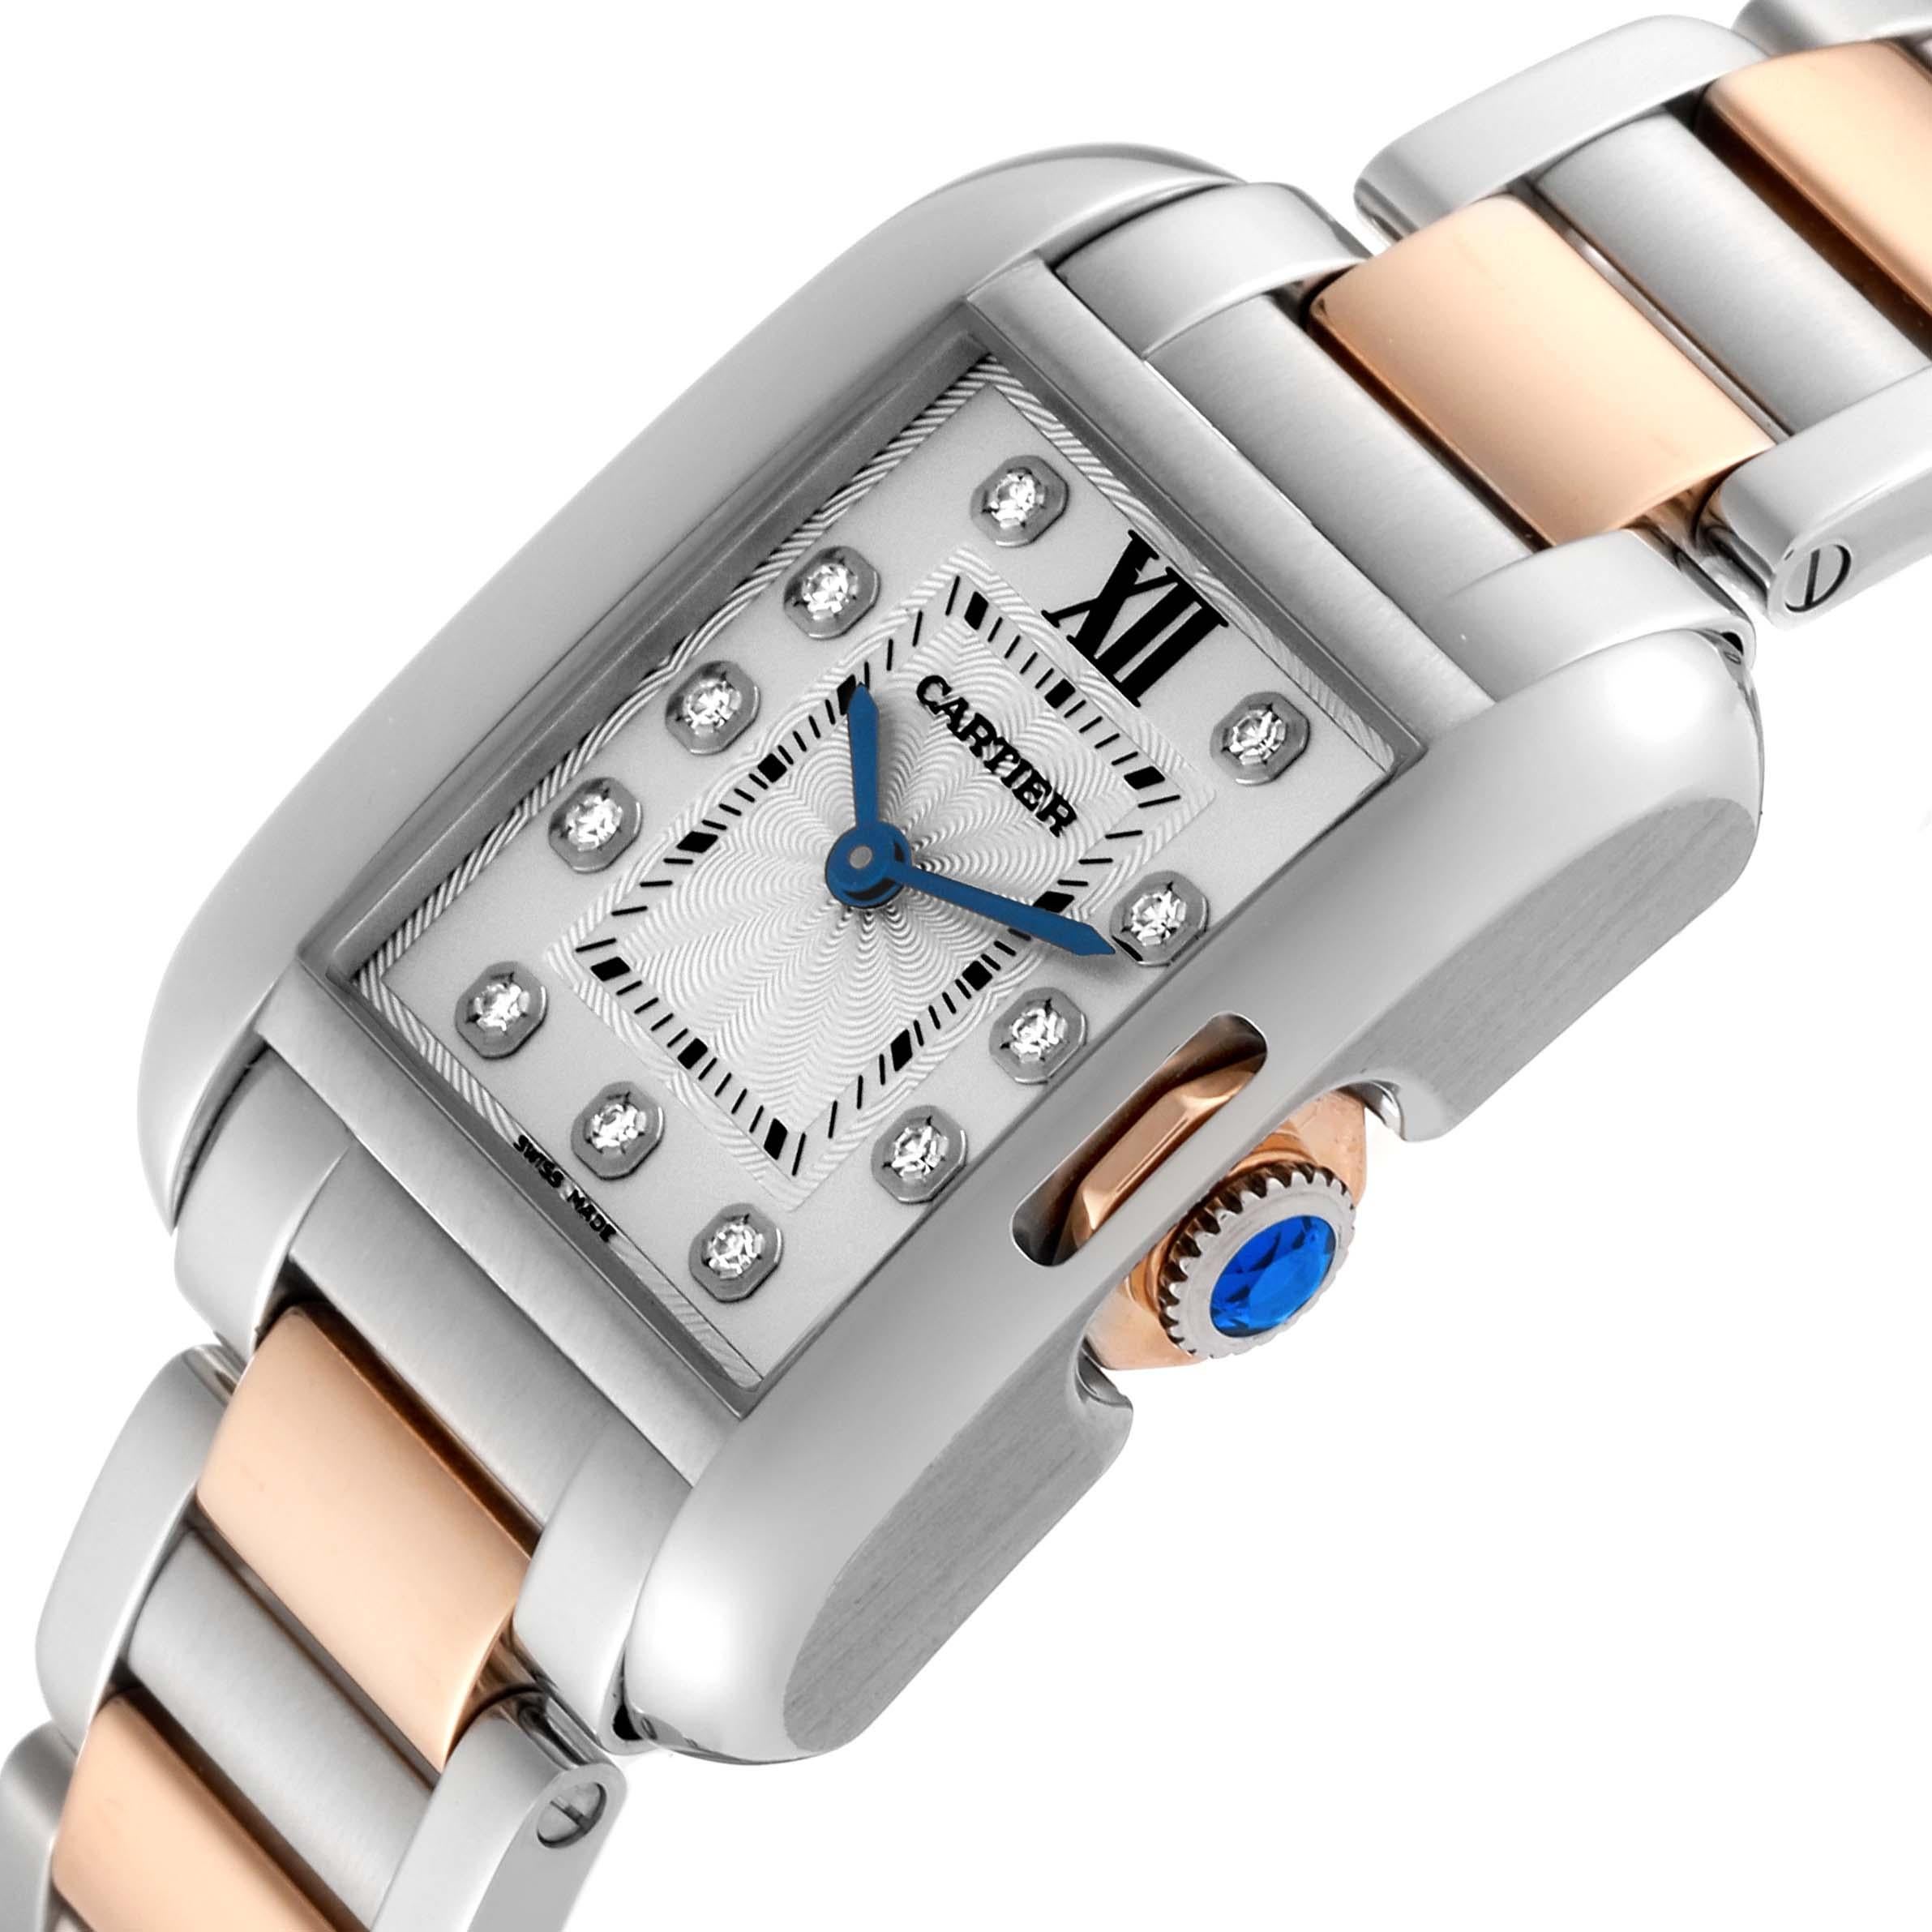 Cartier Tank Anglaise Small Steel Rose Gold Diamond Dial Ladies Watch WT100024. Quartz movement. Stainless steel and 18K rose gold case 30.2 x 22.7 mm. Circular grained crown set with a blue spinel cabochon. . Scratch resistant sapphire crystal.